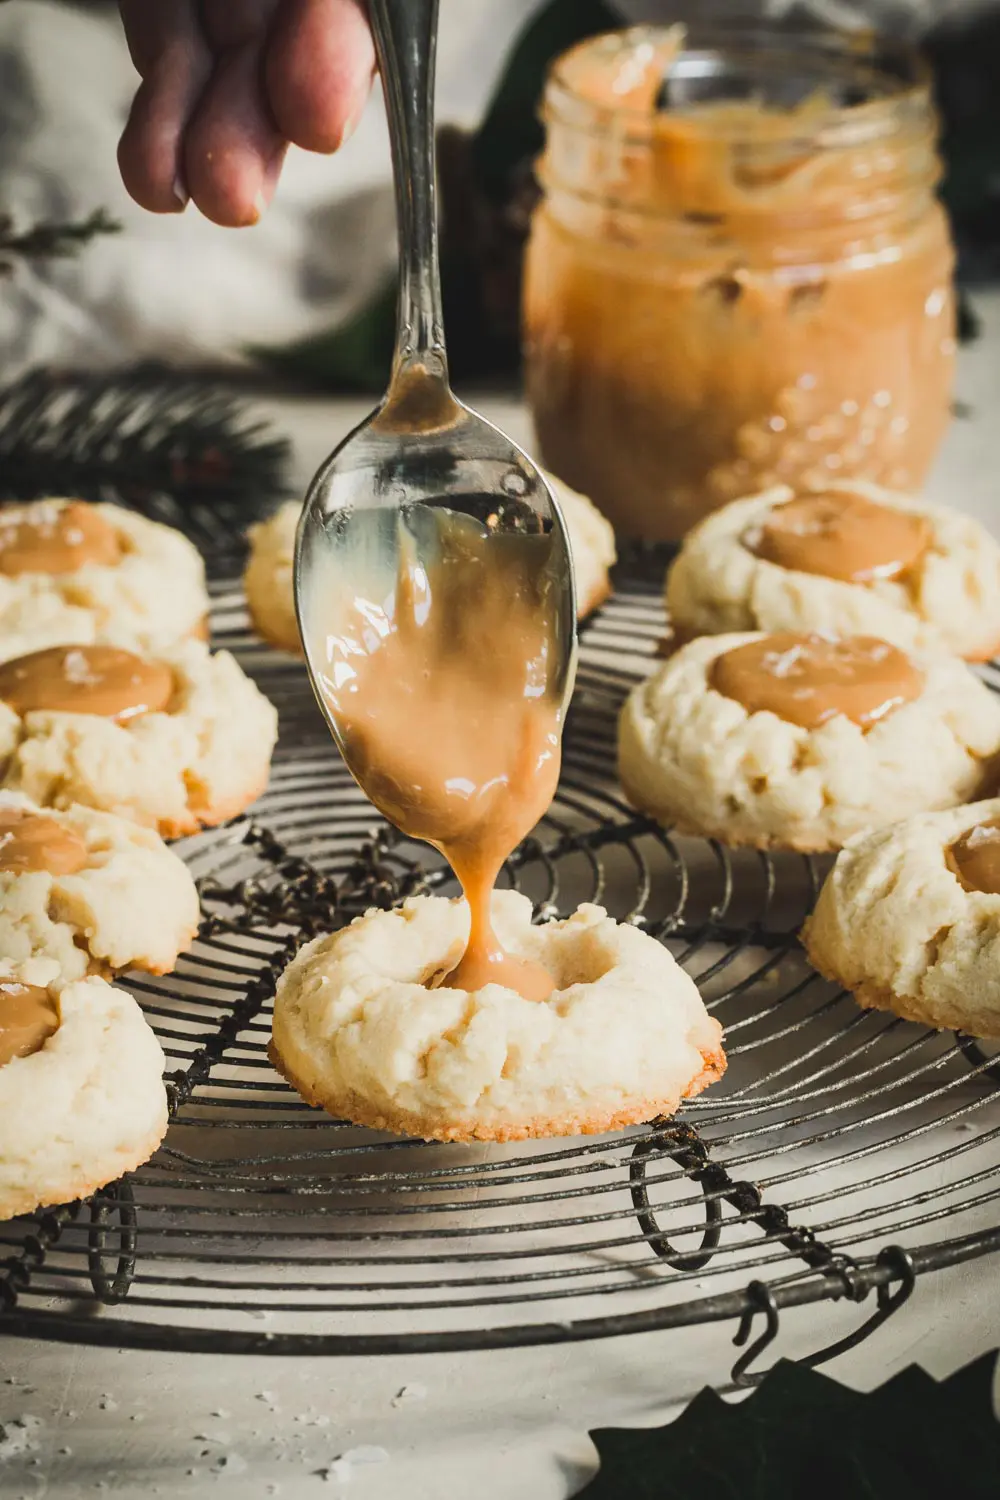 Spoon dripping dulce de leche into thumbprint cookies.